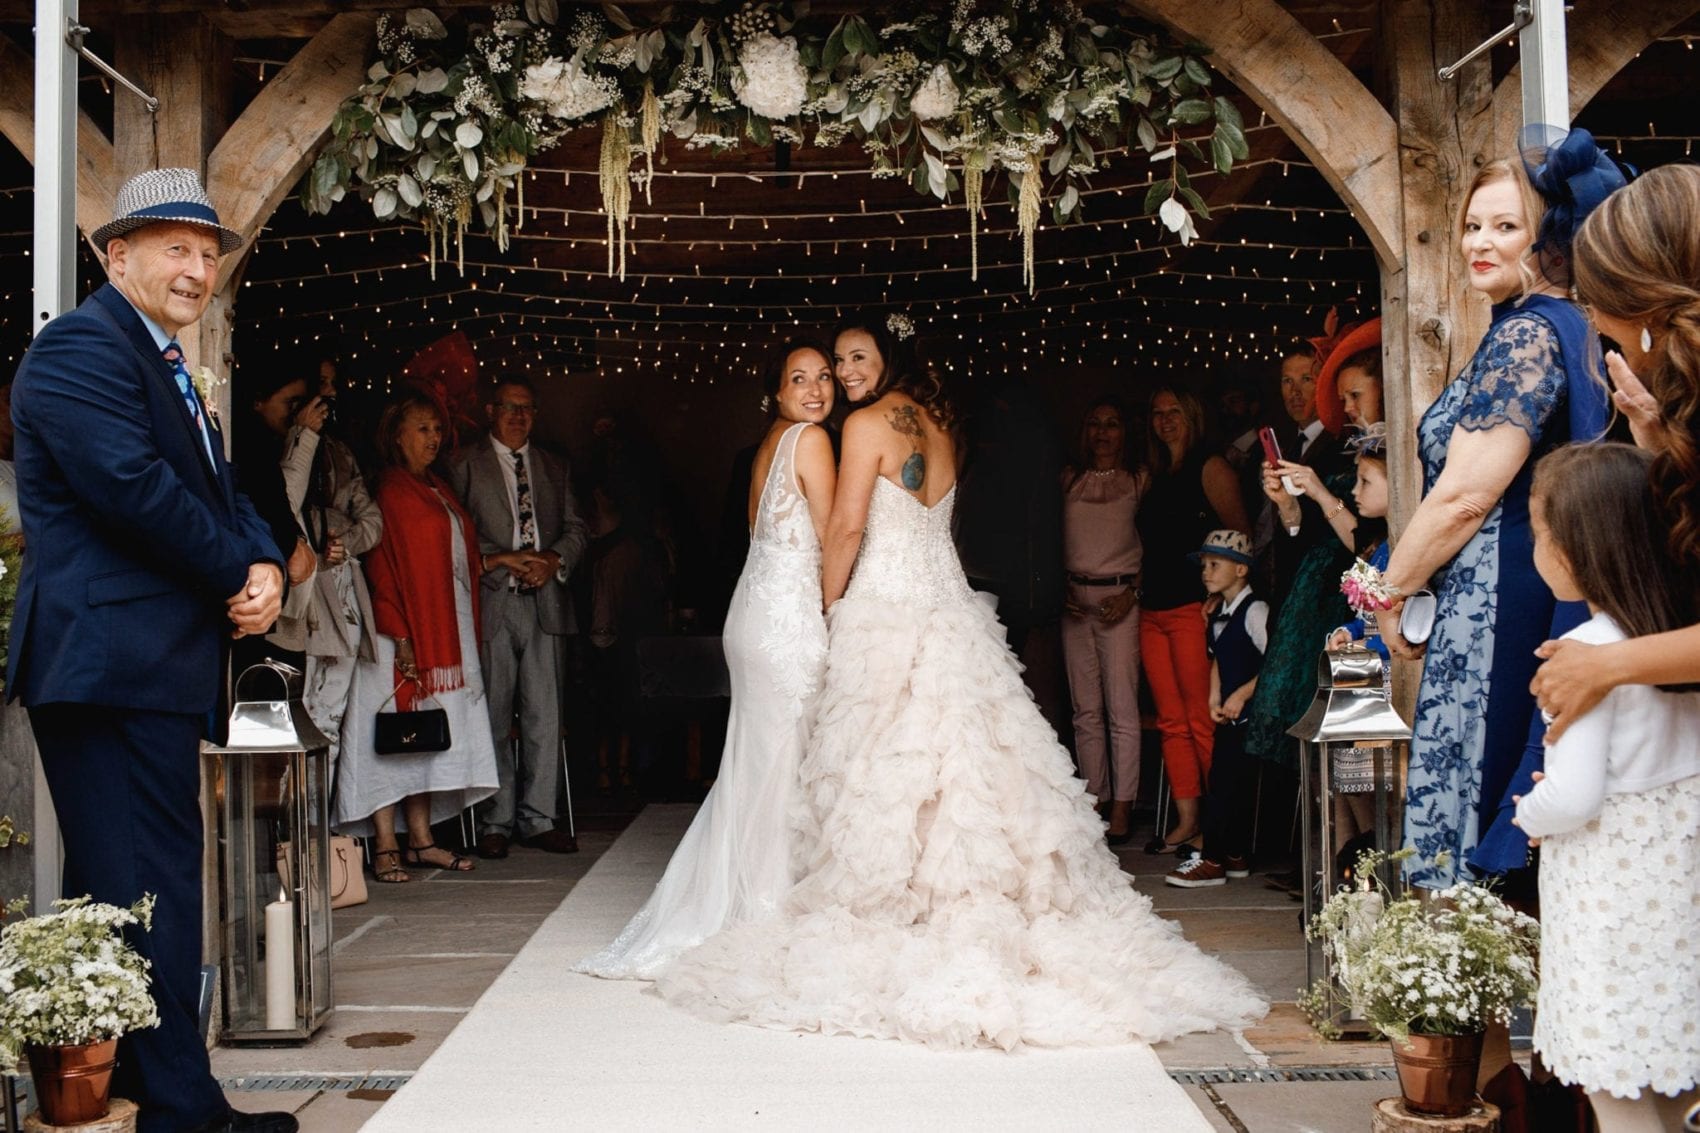 Two brides walking down the isle